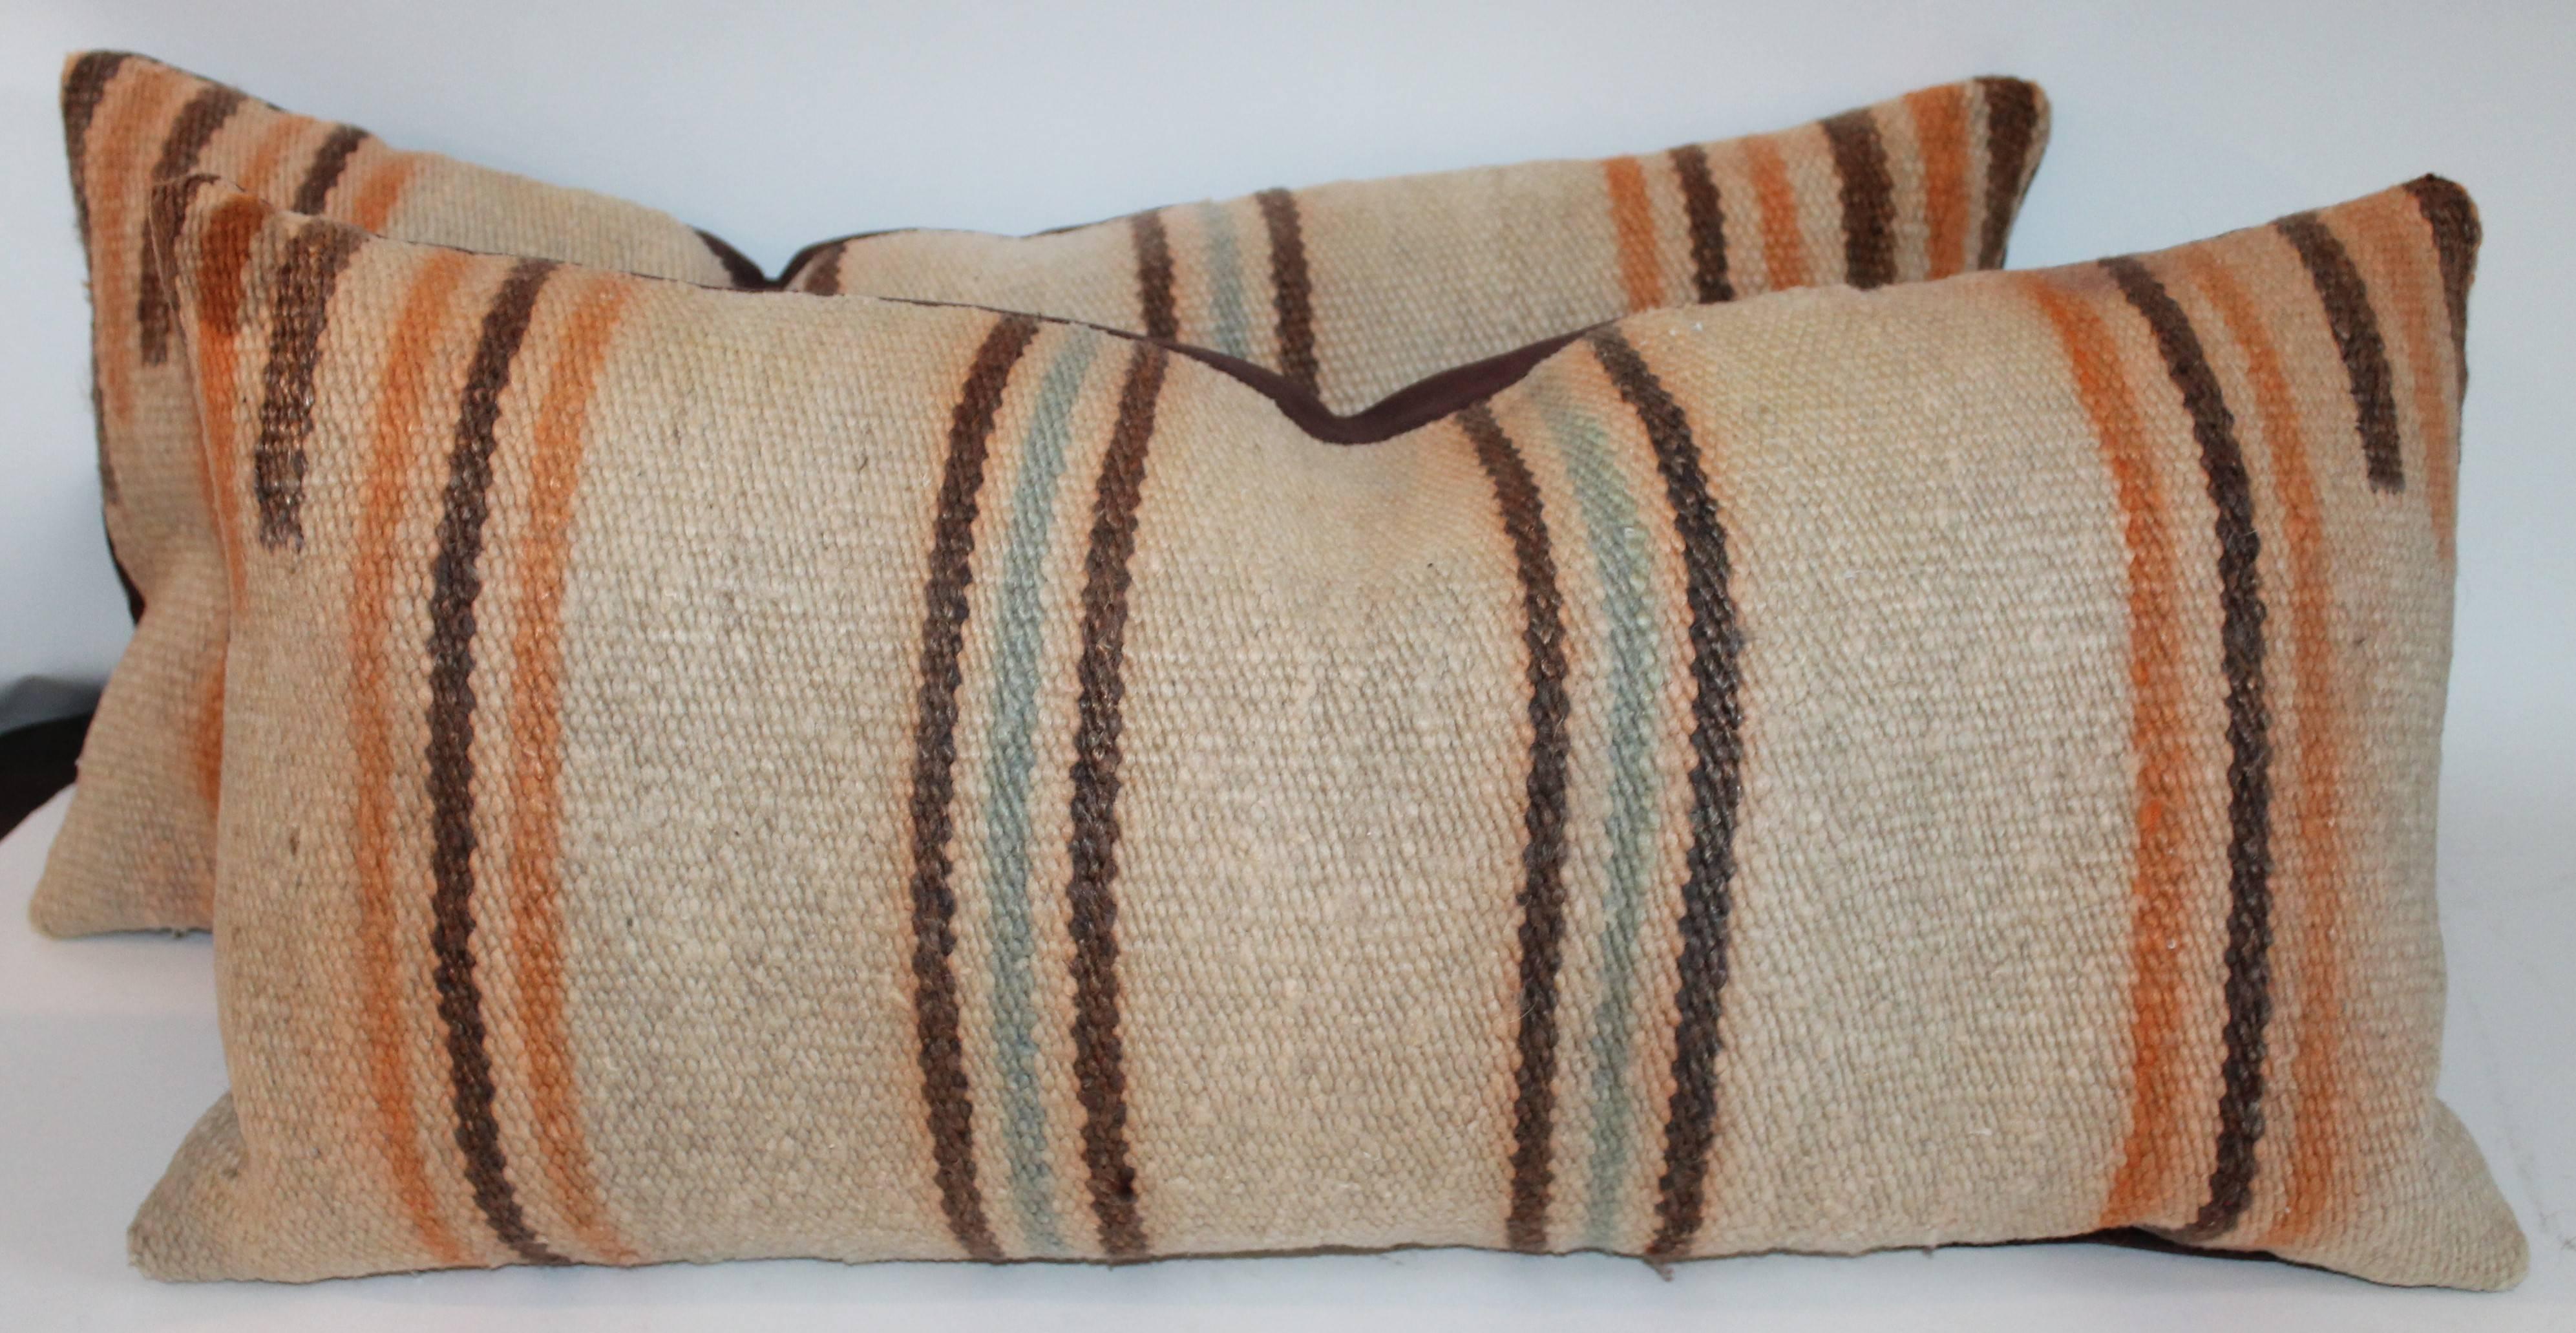 Navajo Saddle Blanket Weaving Pillows, Pair In Excellent Condition For Sale In Los Angeles, CA